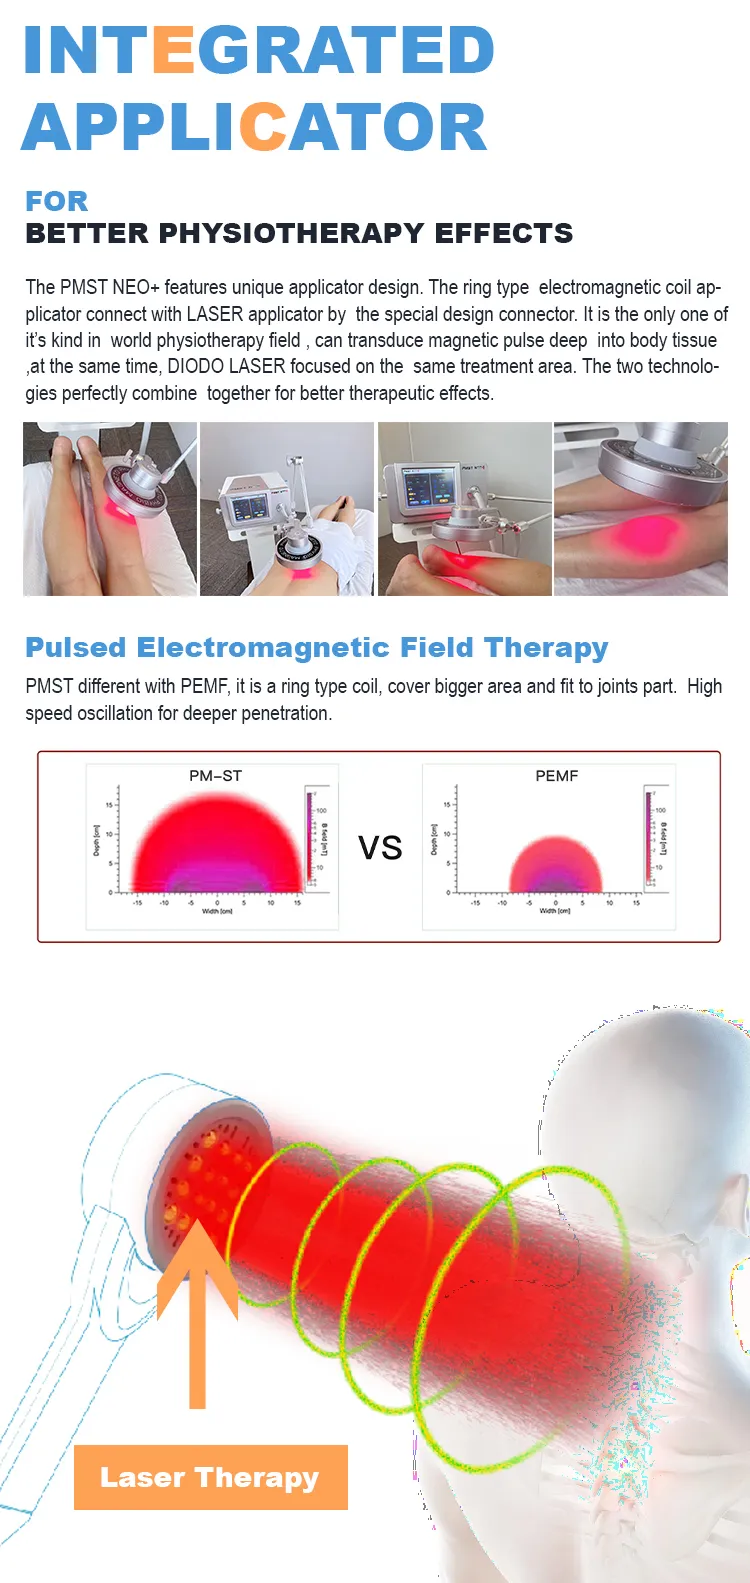 Noninvasive Magnetotherapy Physiotherapy Pulse Electromagnetic Muscle Pain Pain Relief Super Transduction Plus Physio Magneto Machine Noninvasive magnetotherapy physiotherapy machine pain relief - Honkay magneto physio therapy,physio magneto,magnetic therapy,magnetic rings,magnetic rings for weight loss